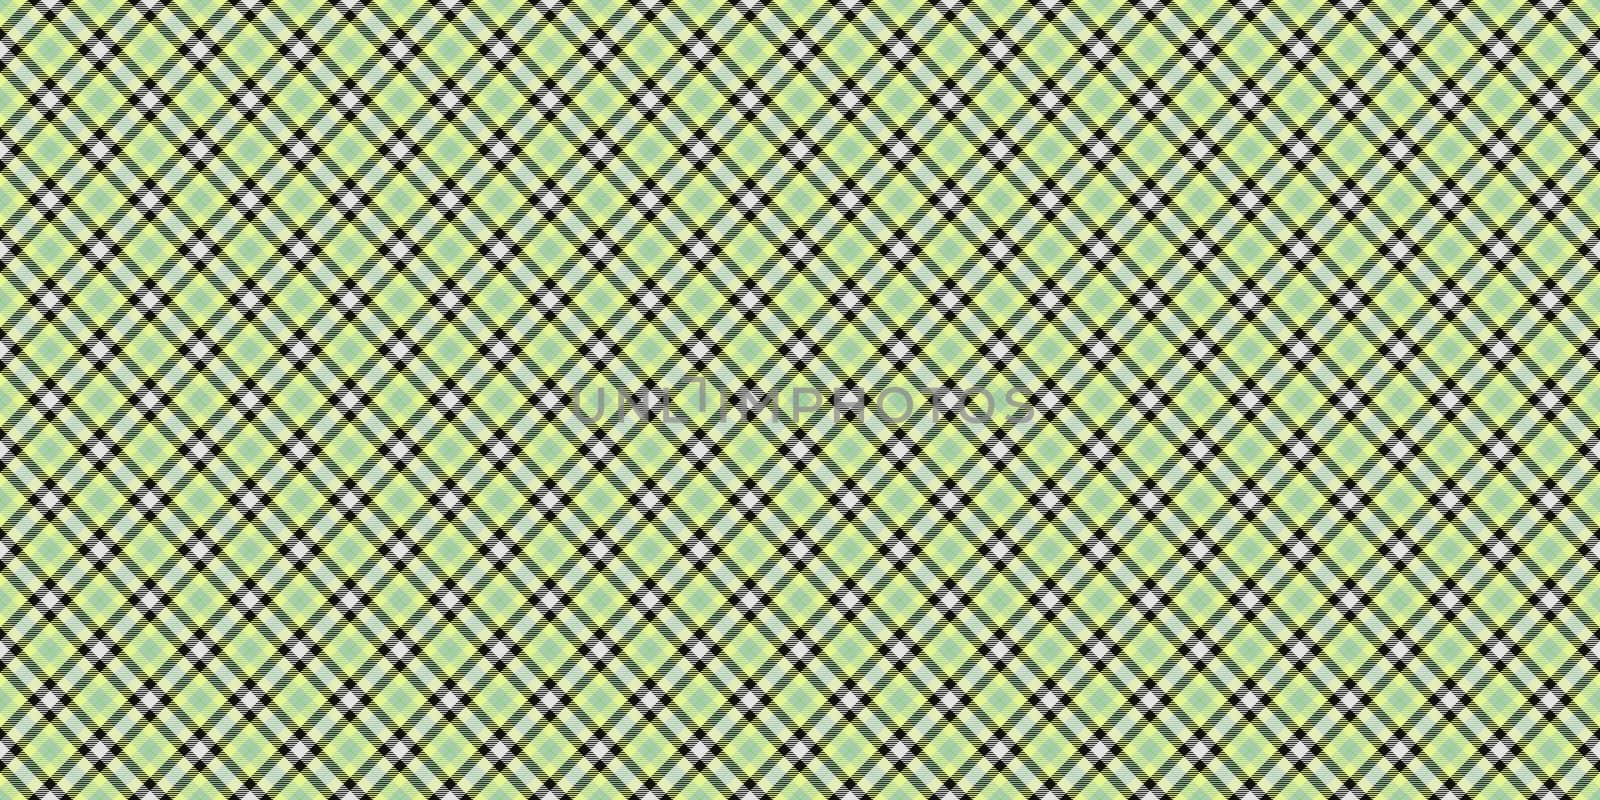 Light Green Seamless Checkered Rhombuses Pattern. Plaid Rug Background. Tartan Texture. by sanches812